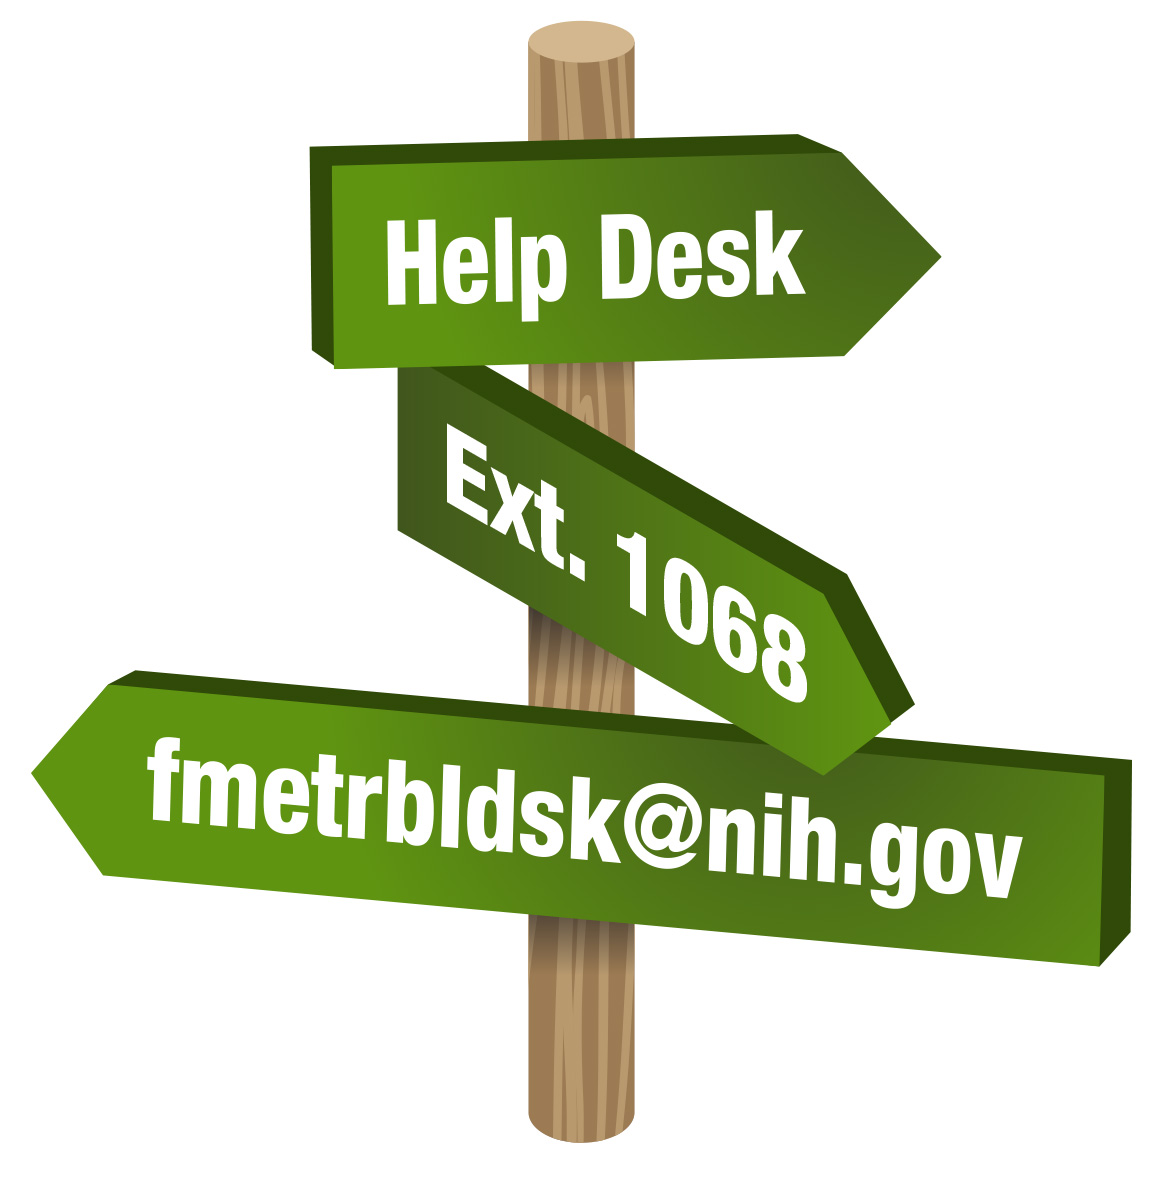 Signpost with help desk info: extension 1068 and email fmetrbldsk@nih.gov